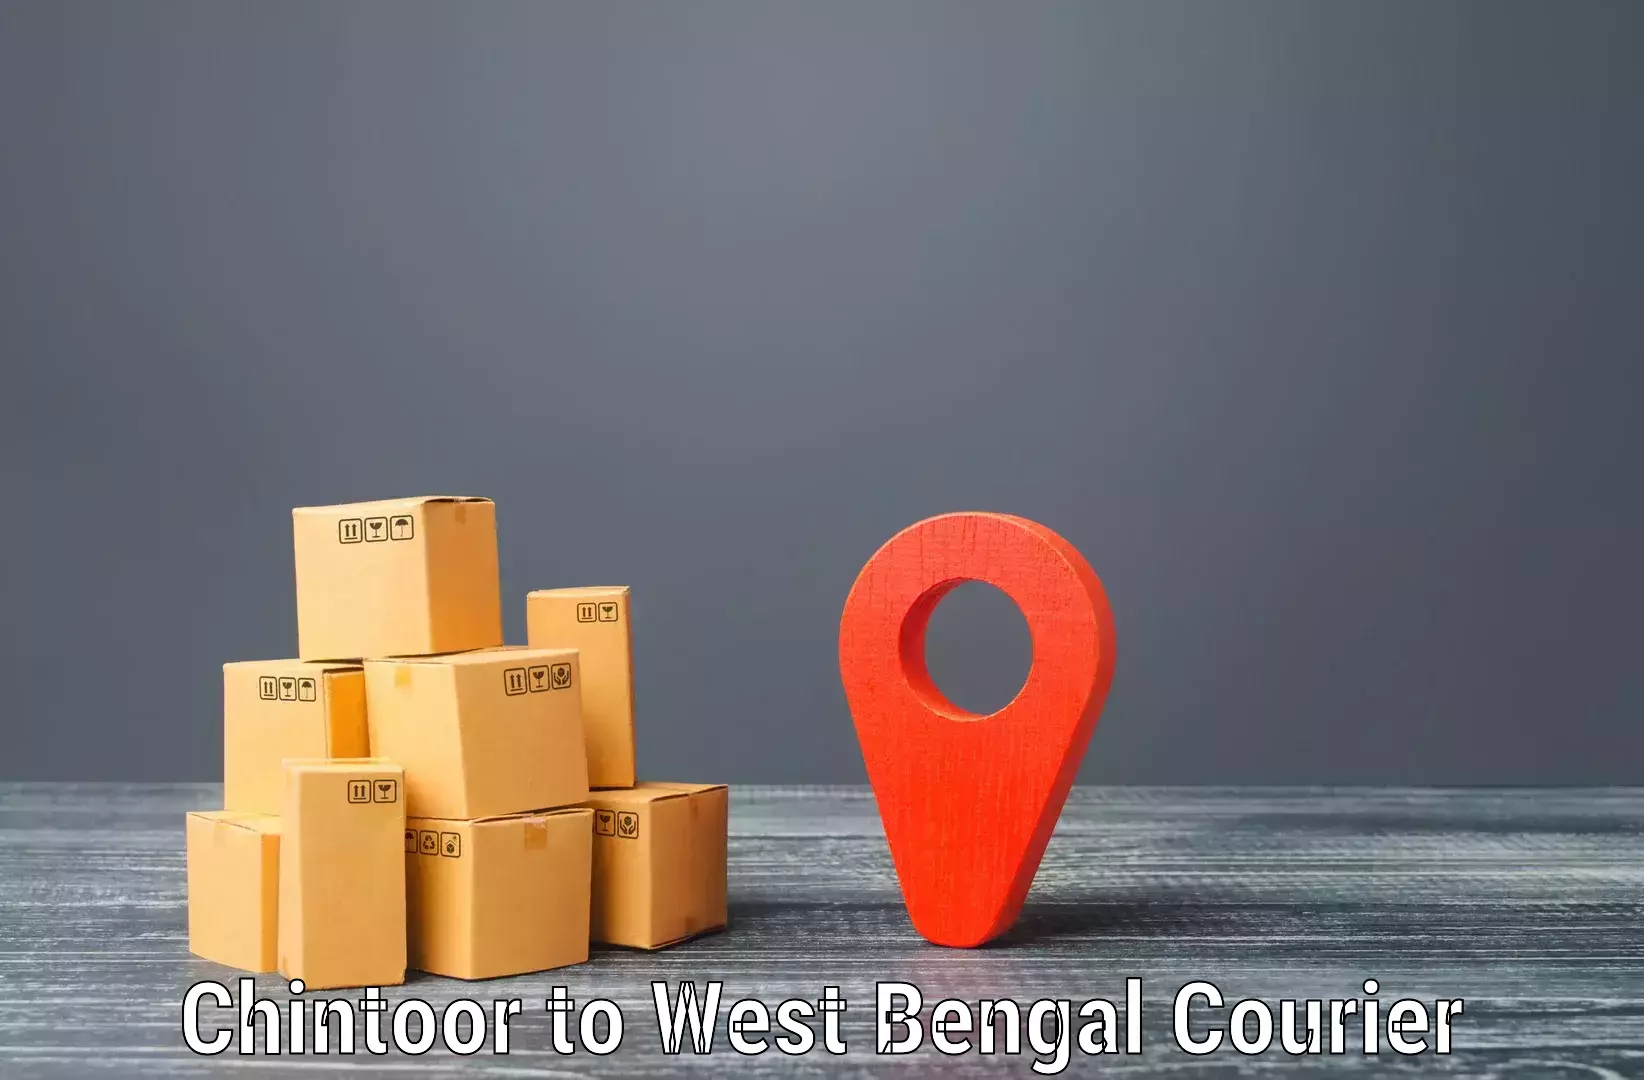 Customer-oriented courier services Chintoor to Tarkeshwar